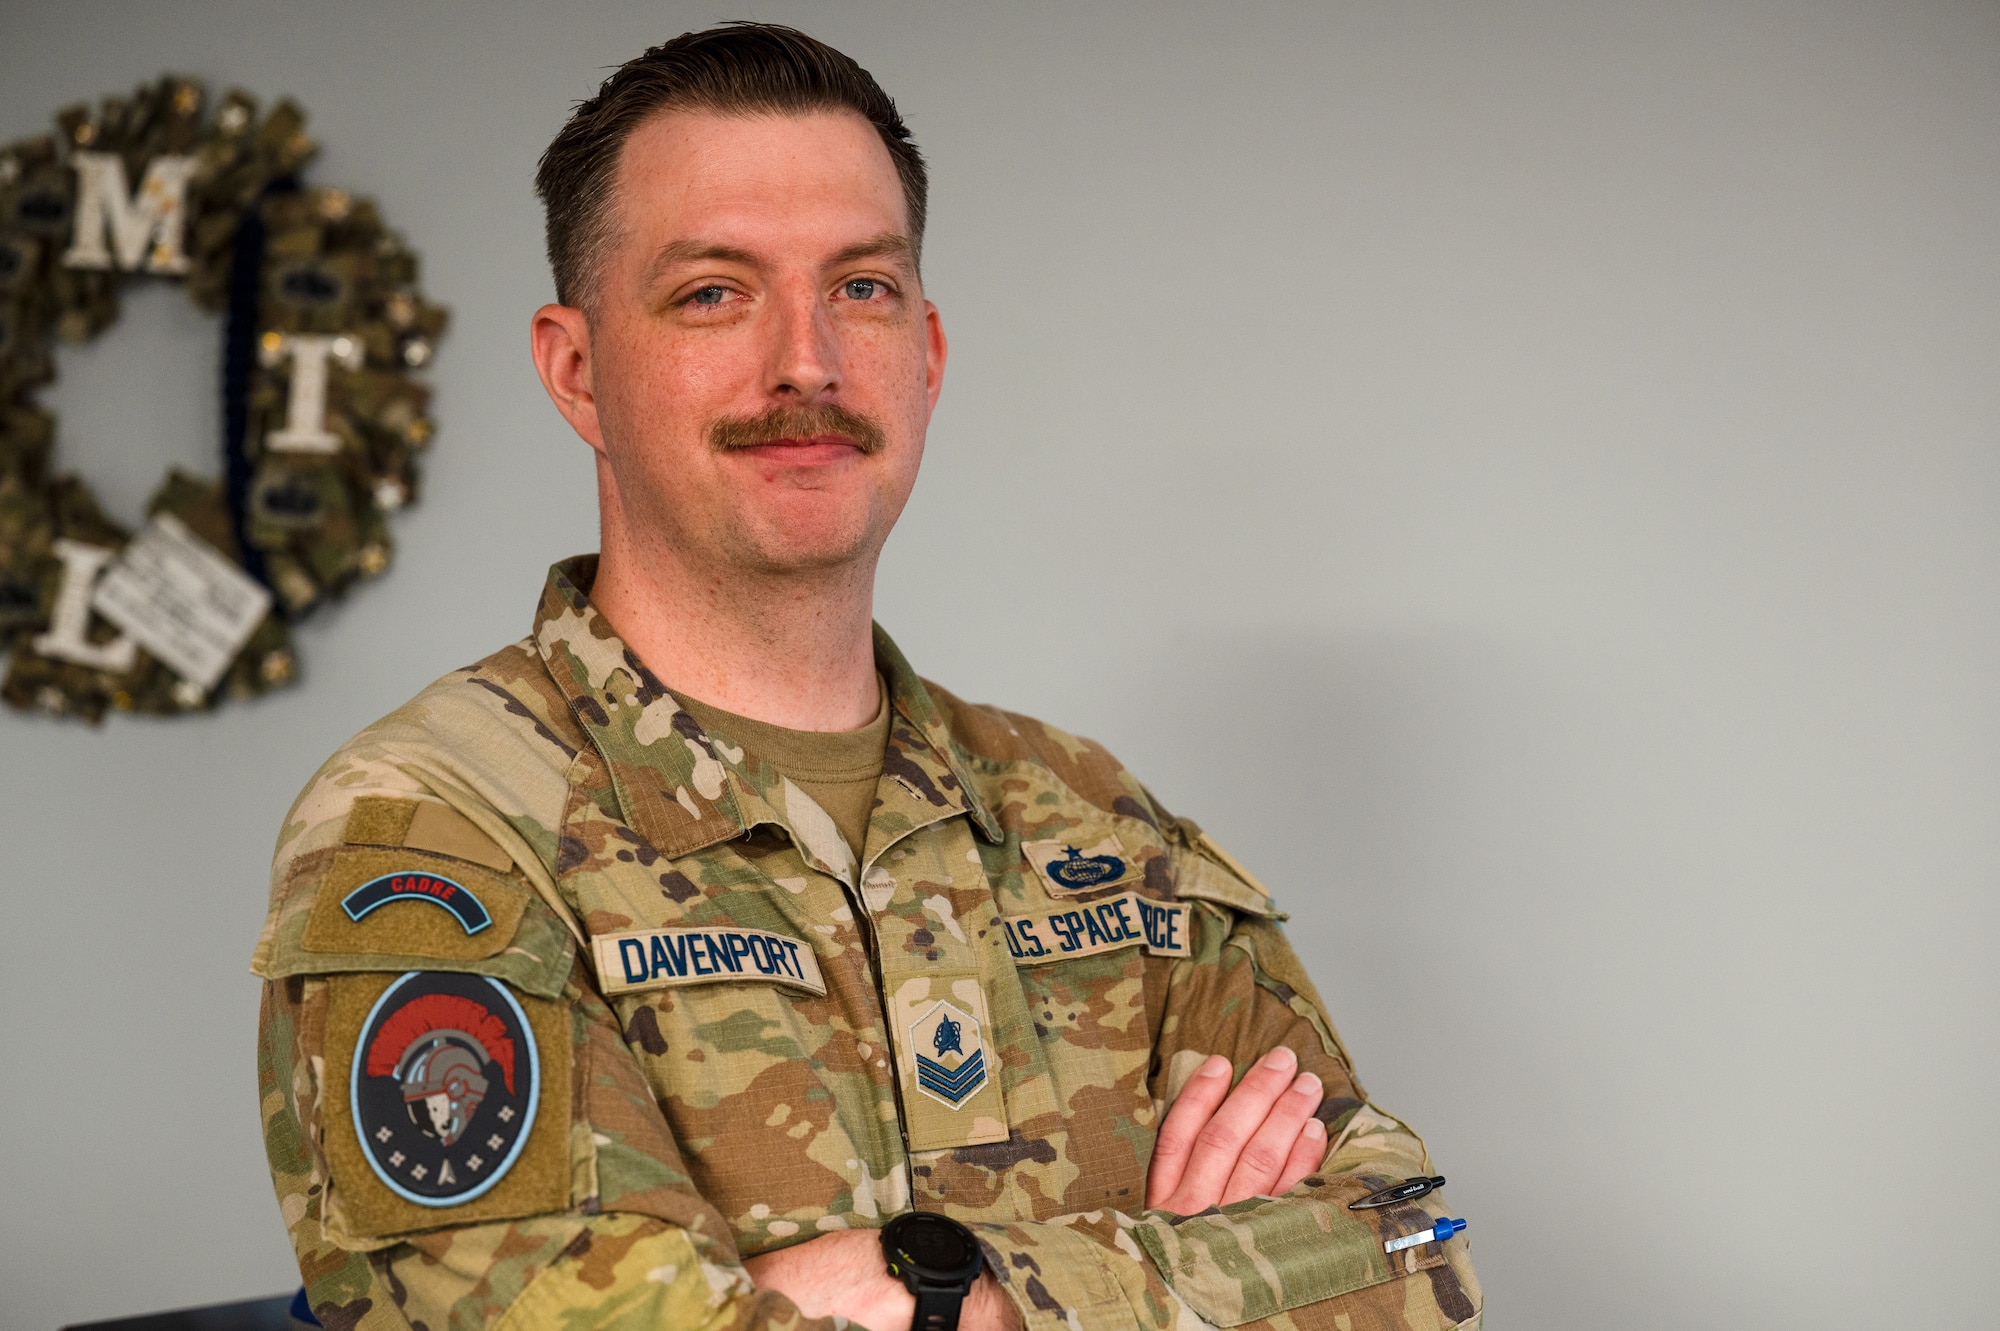 U.S. Space Force Sgt. Thomas Davenport, 533rd Training Squadron, Detachment 1 noncommissioned officer in-charge of Guardian Development, poses for a photo during Military Training Leader School at Keesler Air Force Base, Miss., Feb. 22, 2024. Davenport is the first Space Force Guardian to graduate from MTLS and be certified as an MTL. (U.S. Air Force photo by Senior Airman Trenten A. Walters)